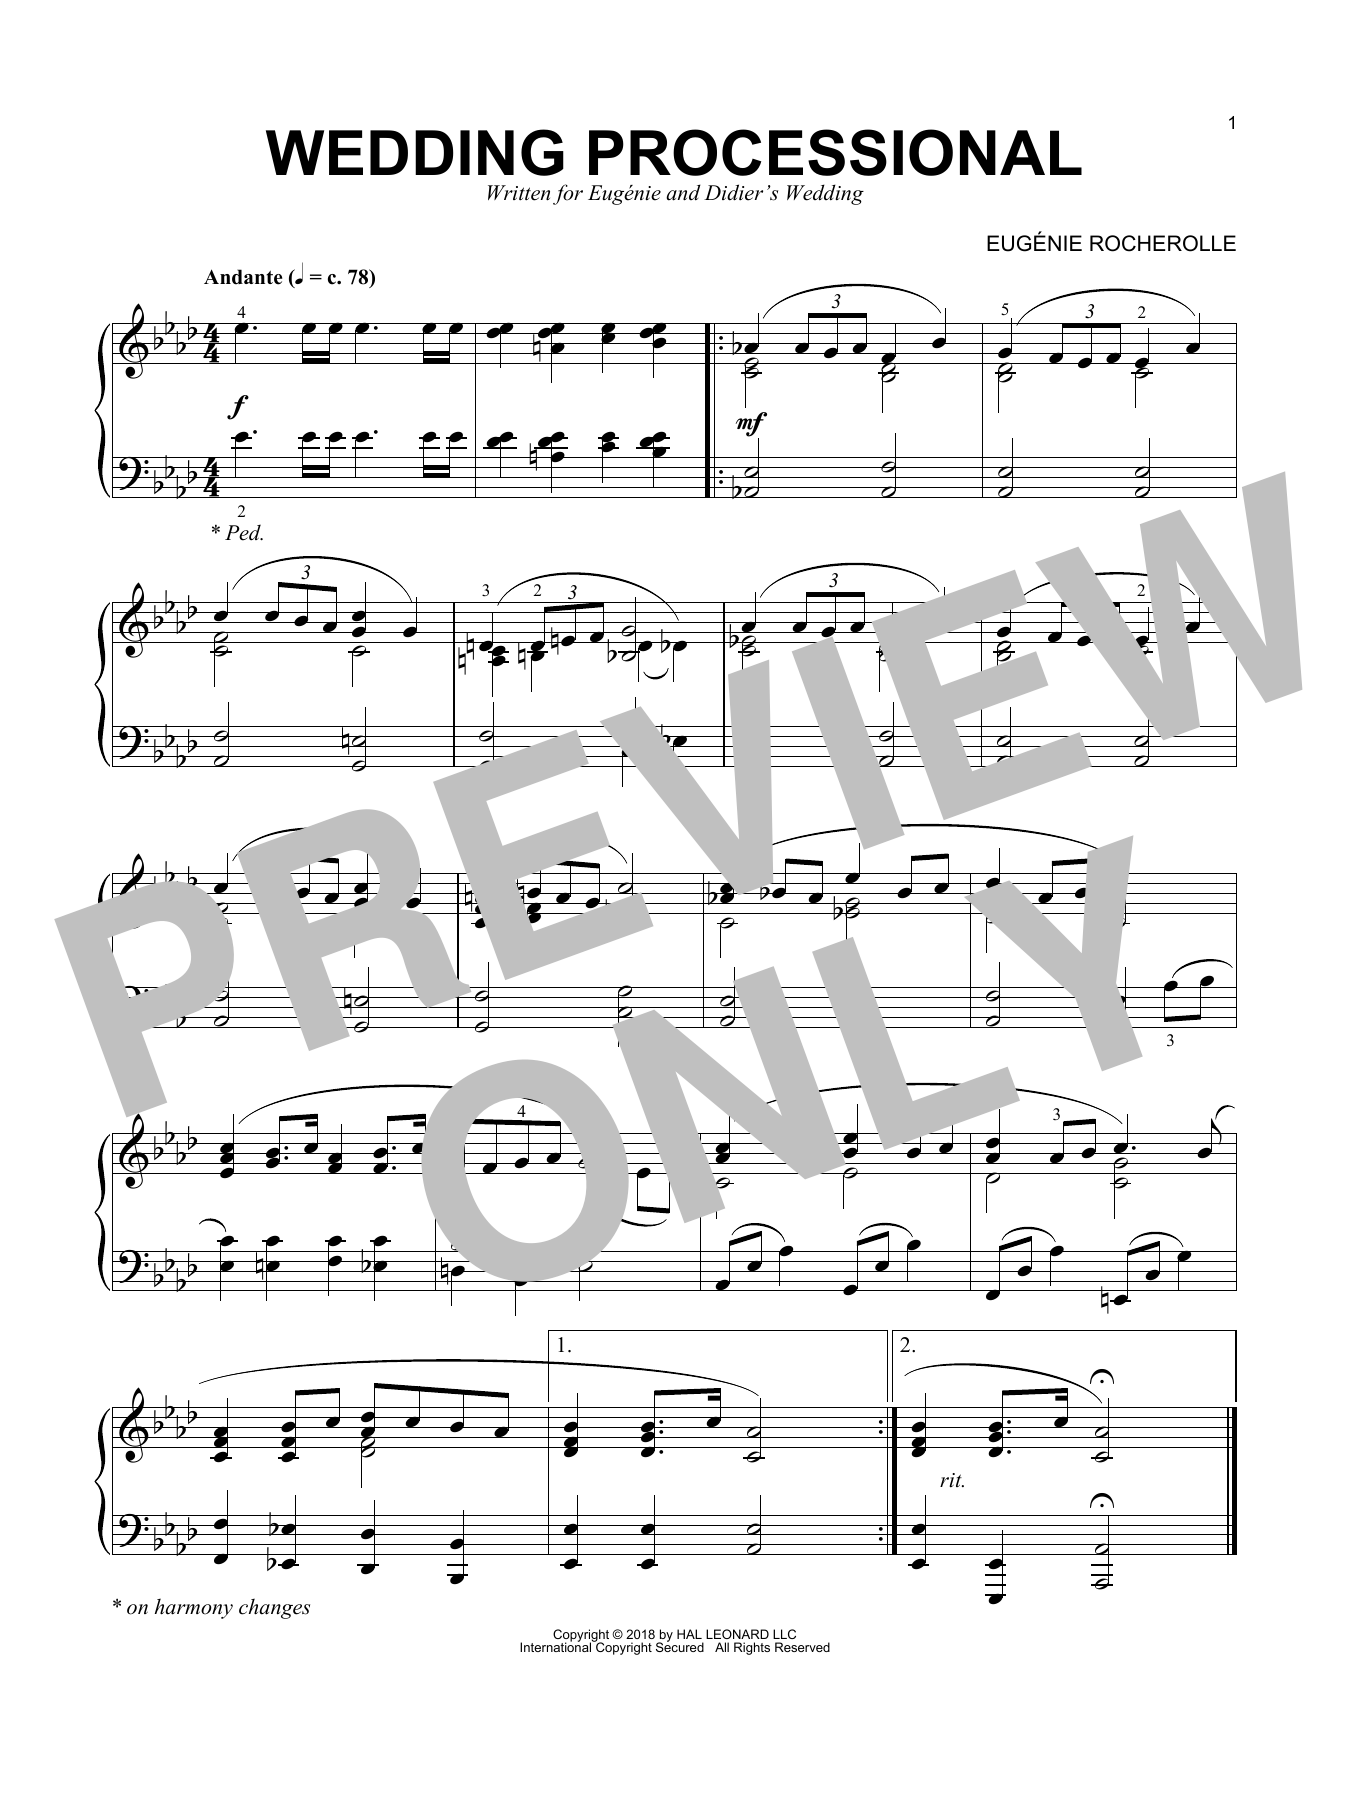 Eugenie Rocherolle Wedding Processional sheet music notes and chords. Download Printable PDF.